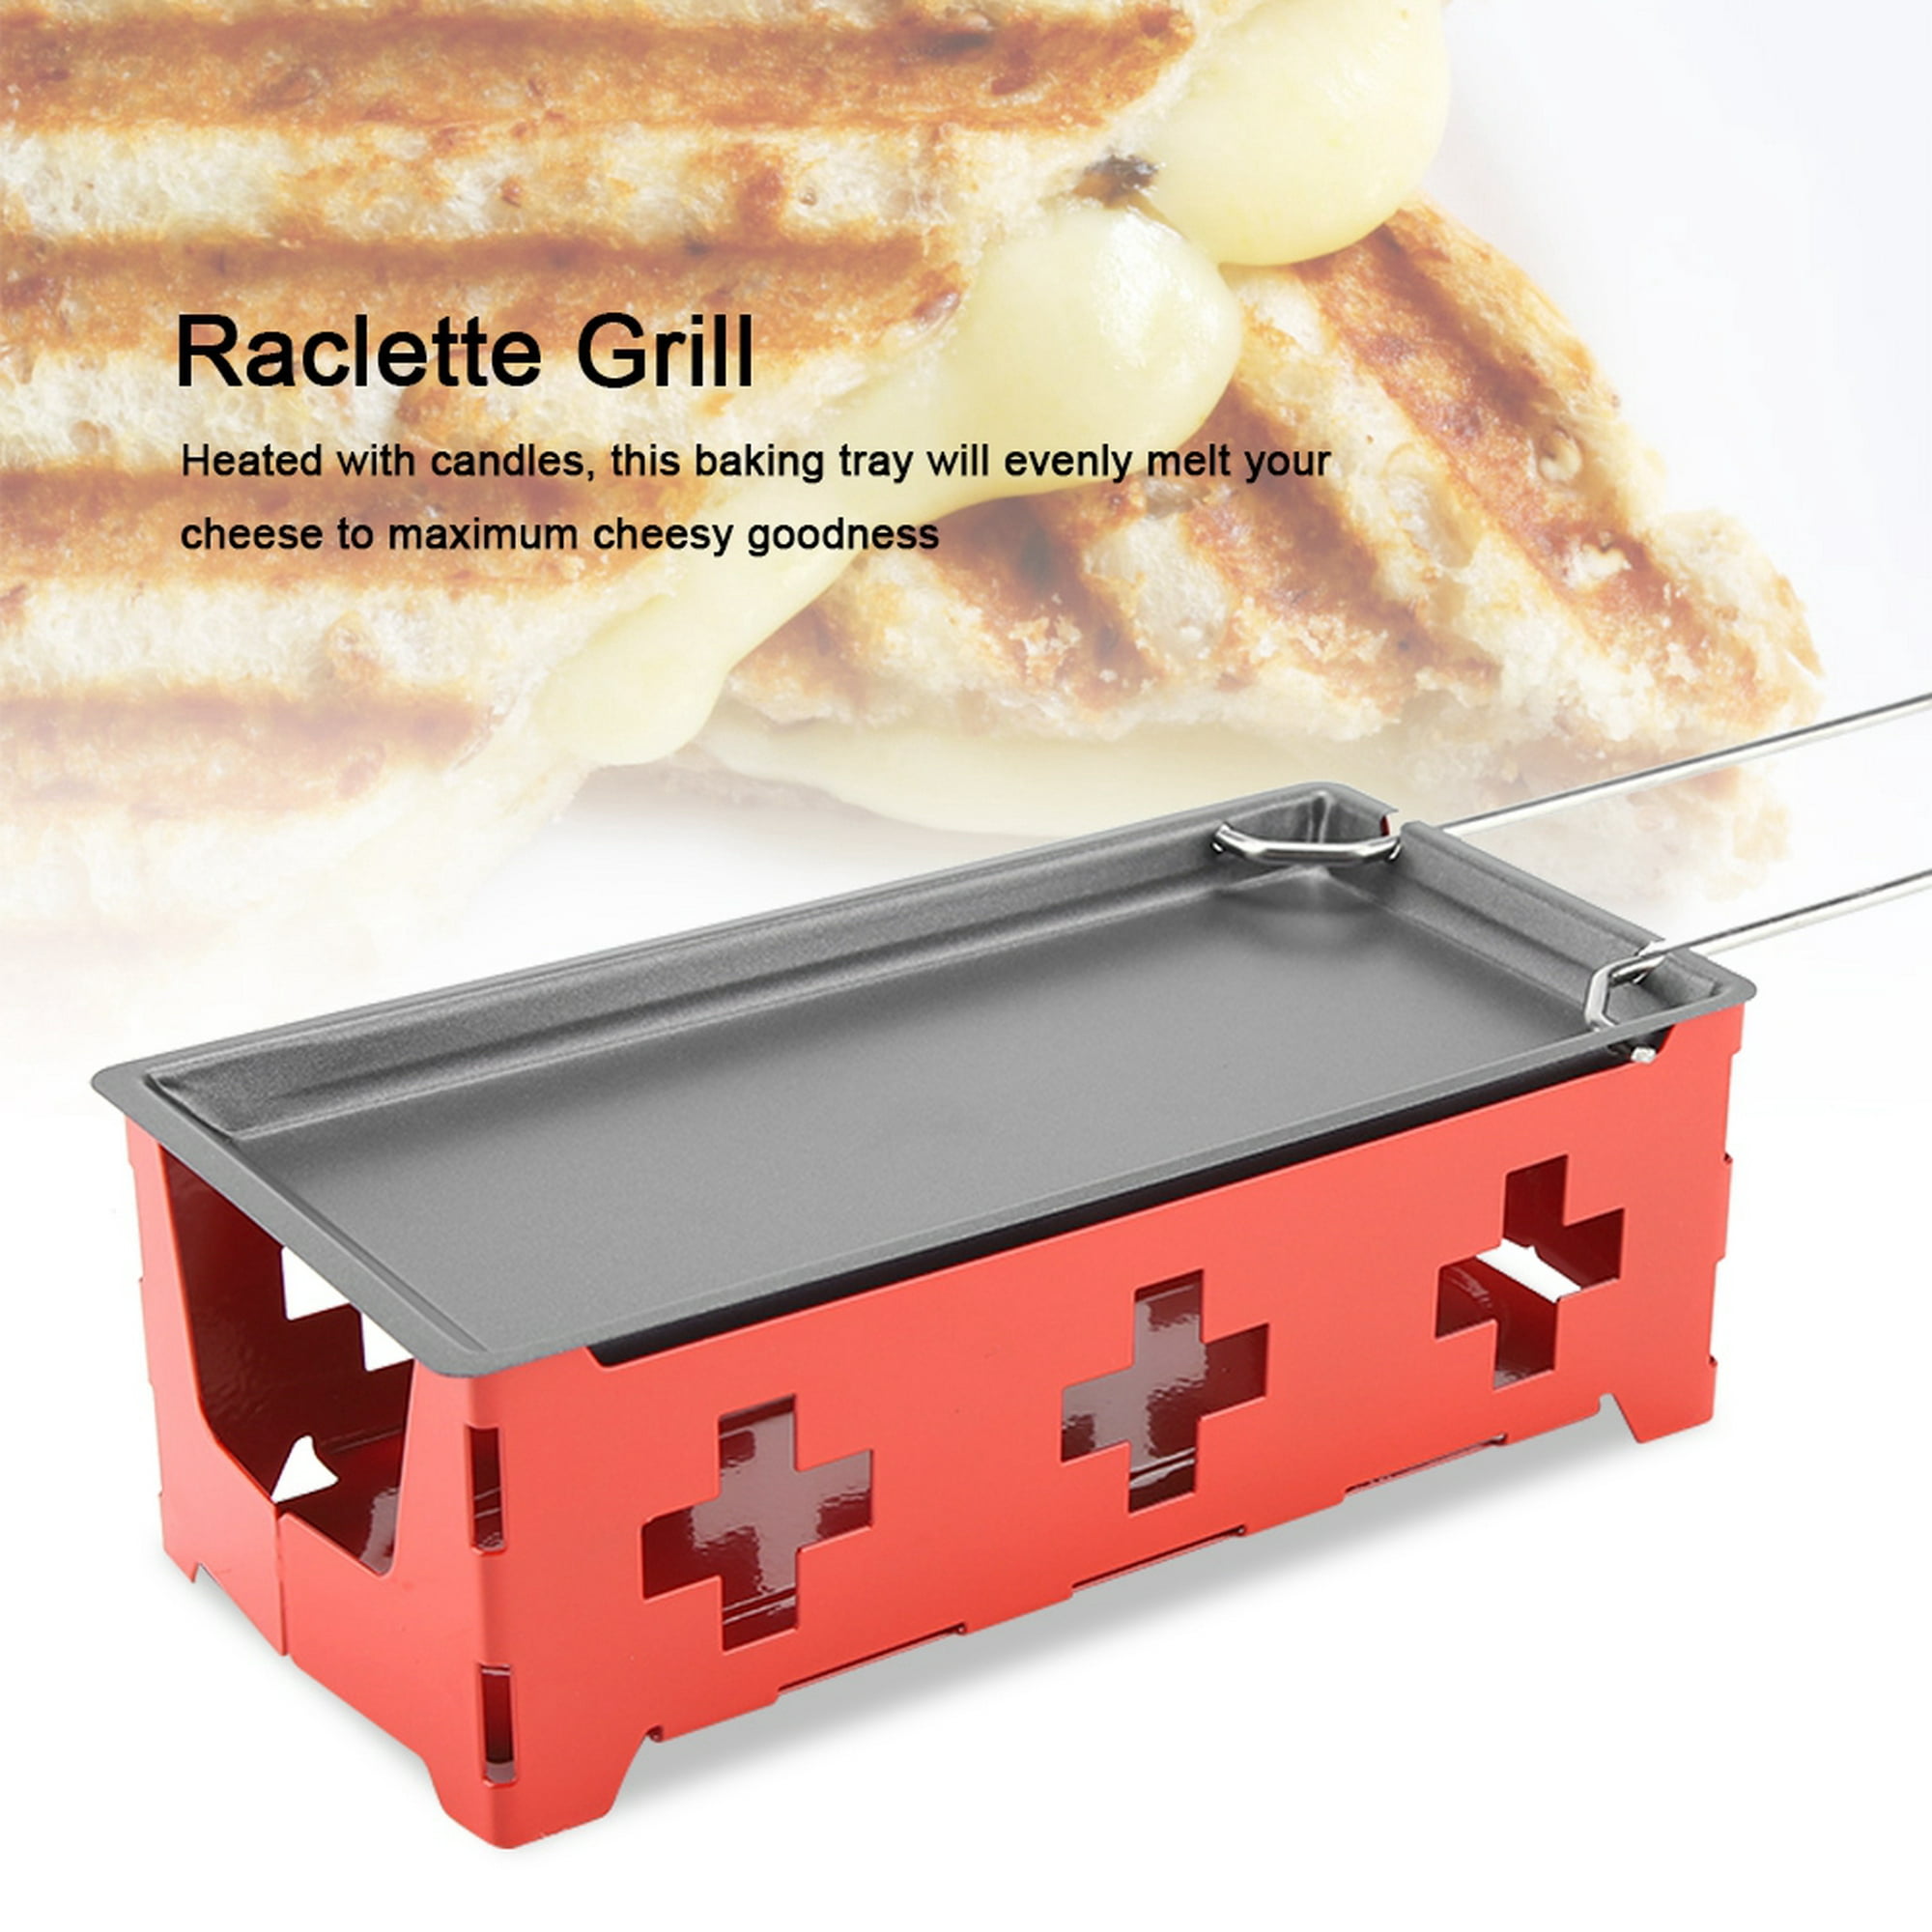 Pack raclette queso para 4/6 personas